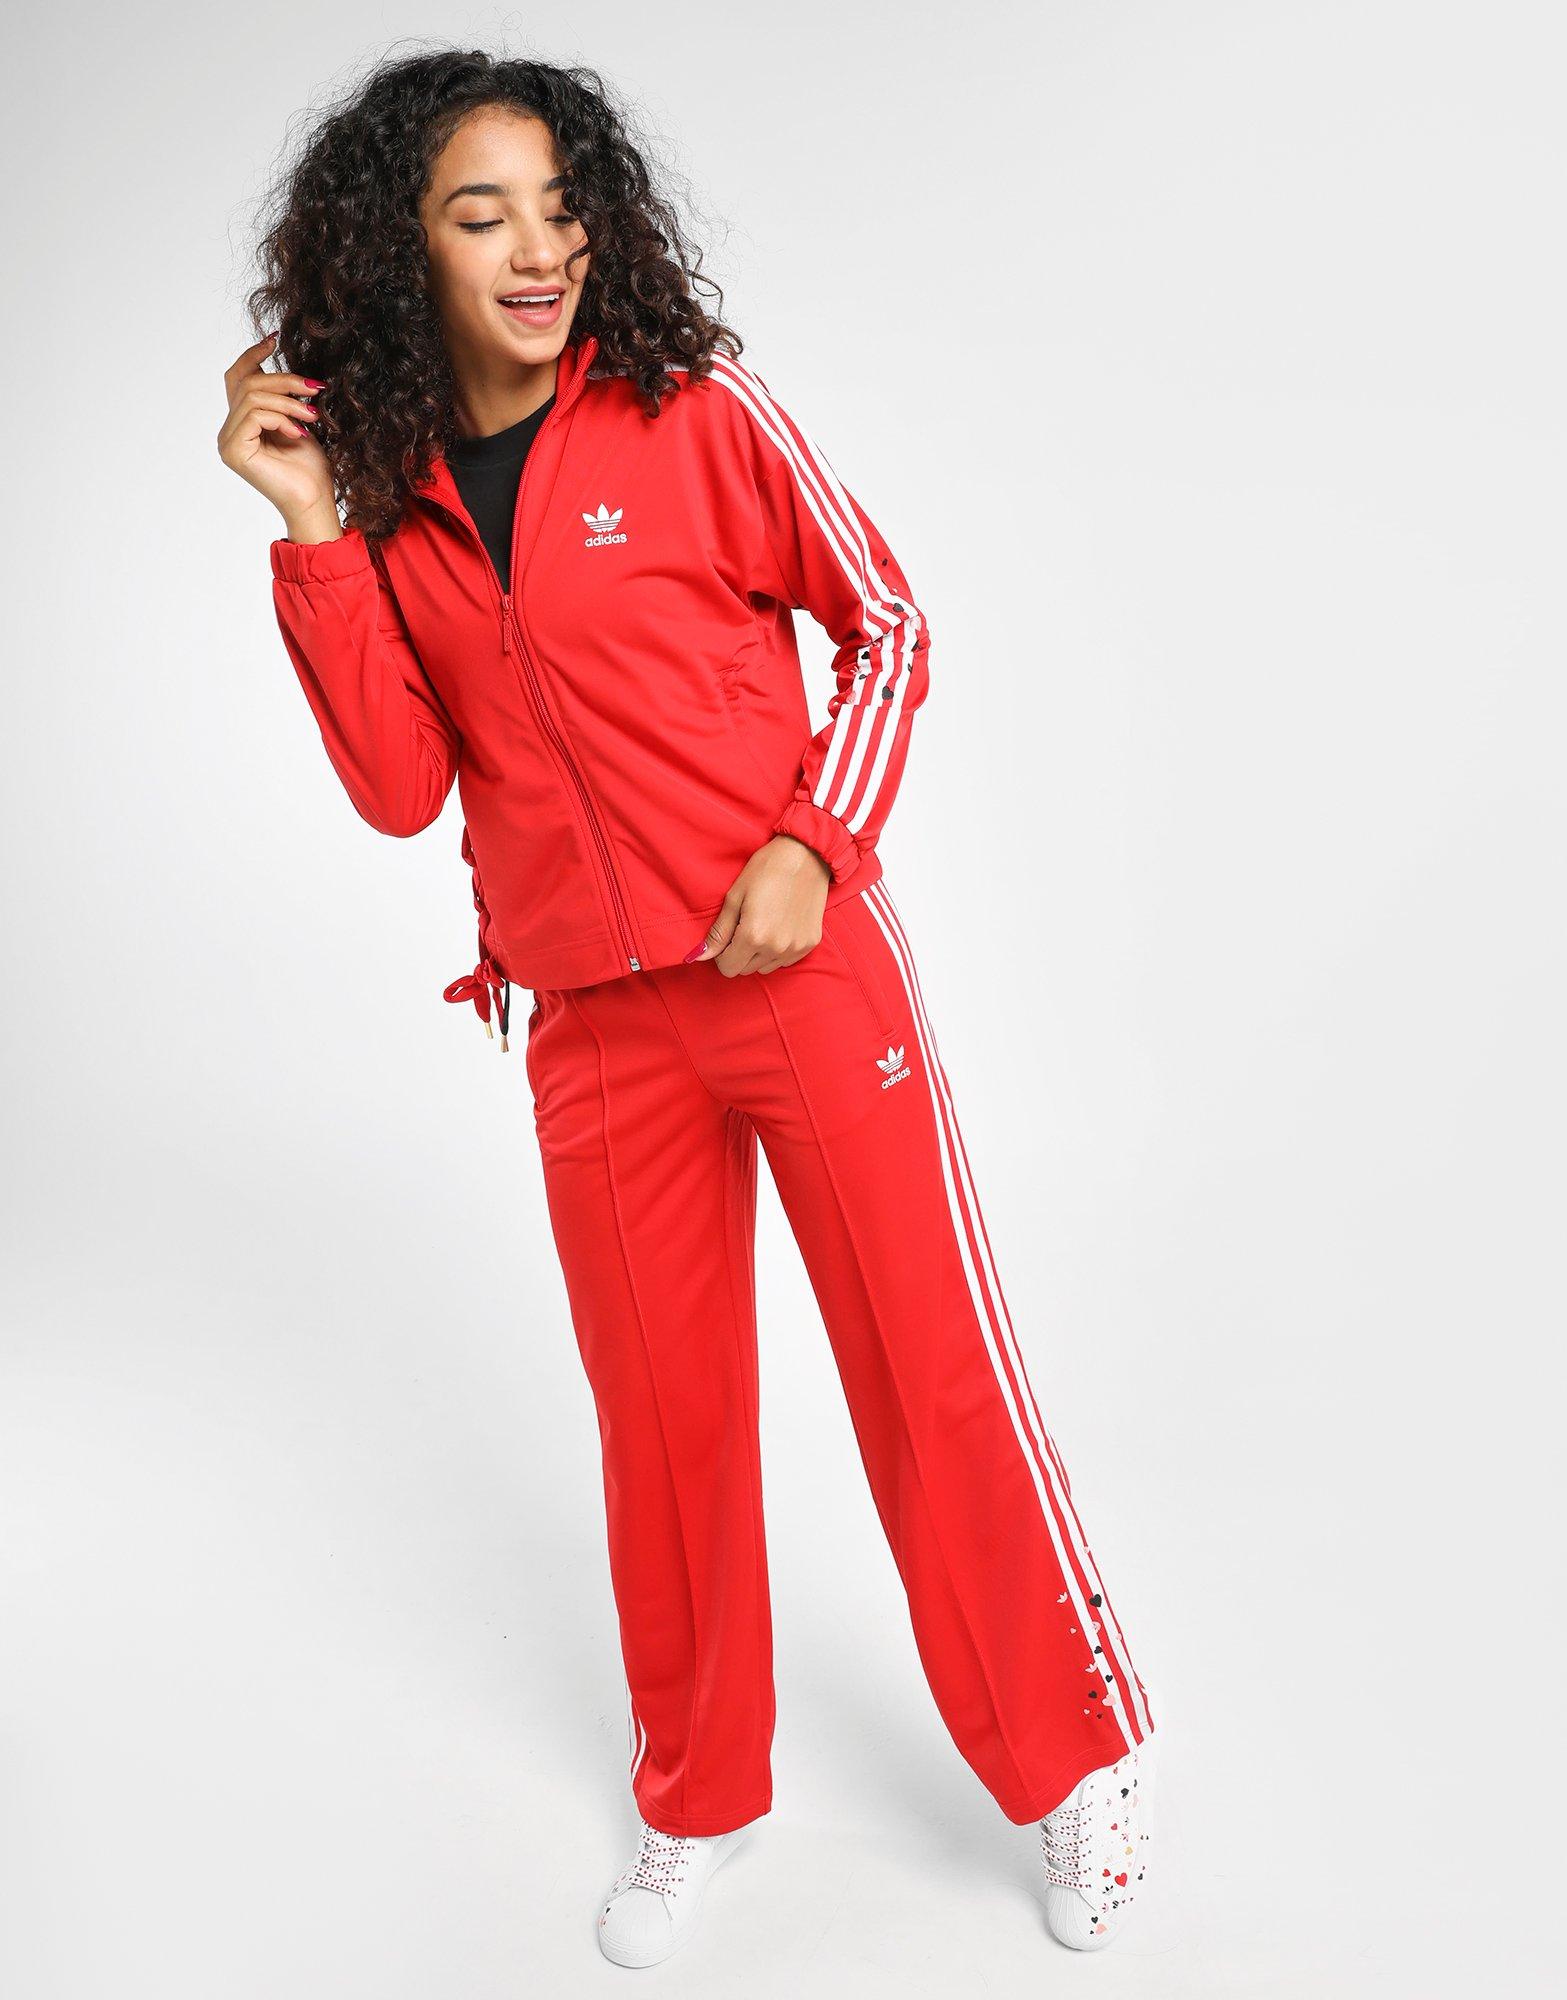 jd red adidas tracksuit